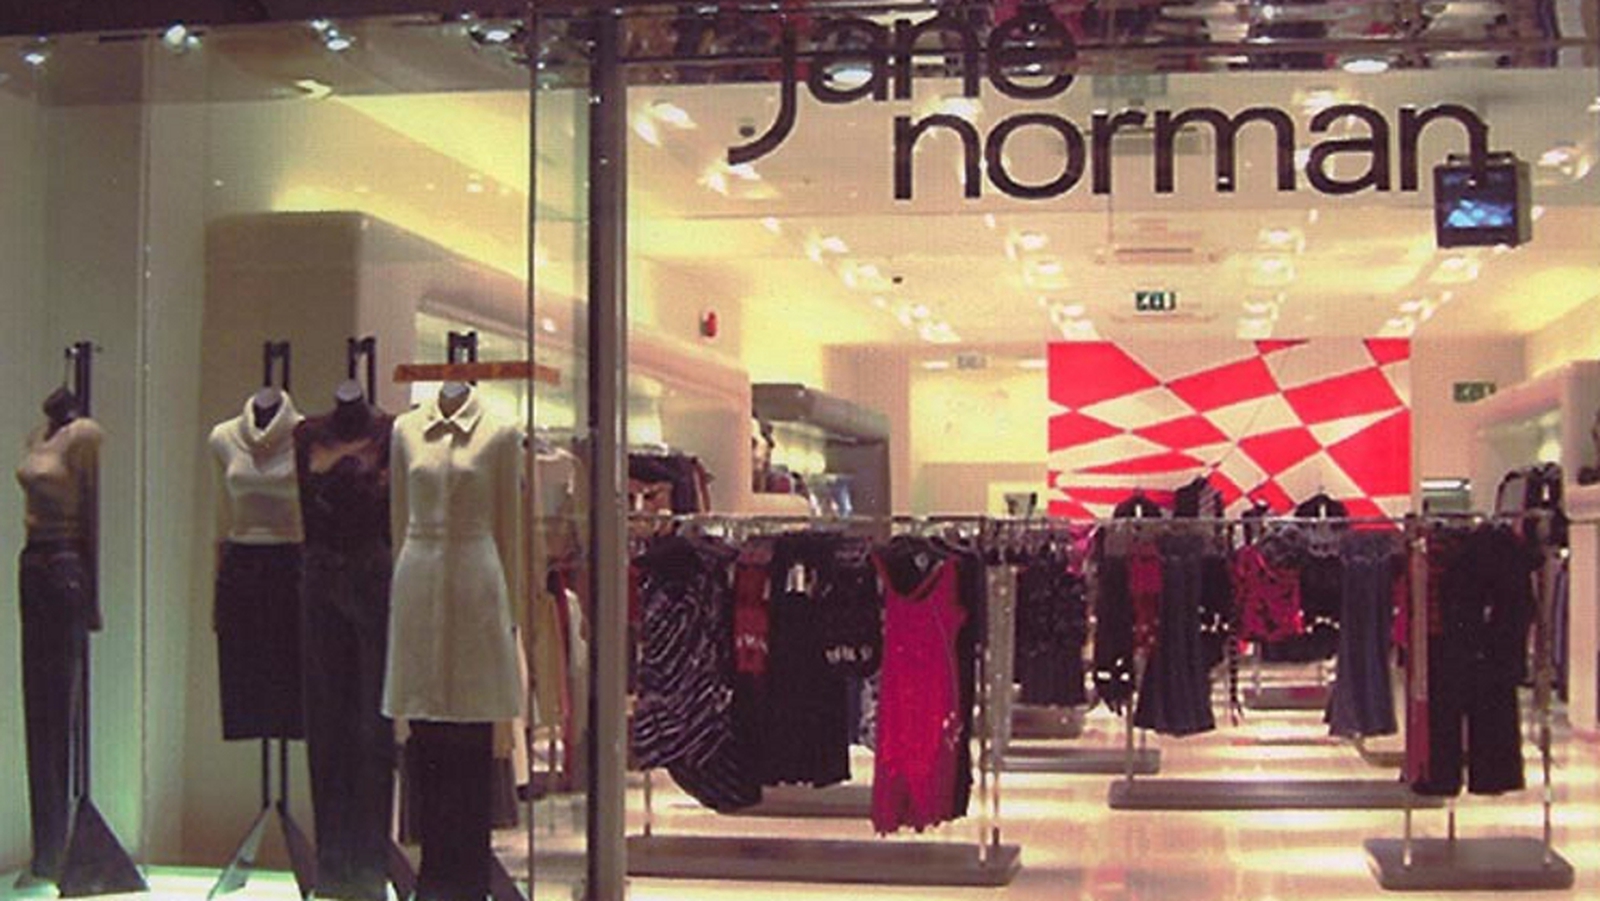 jane norman outlet